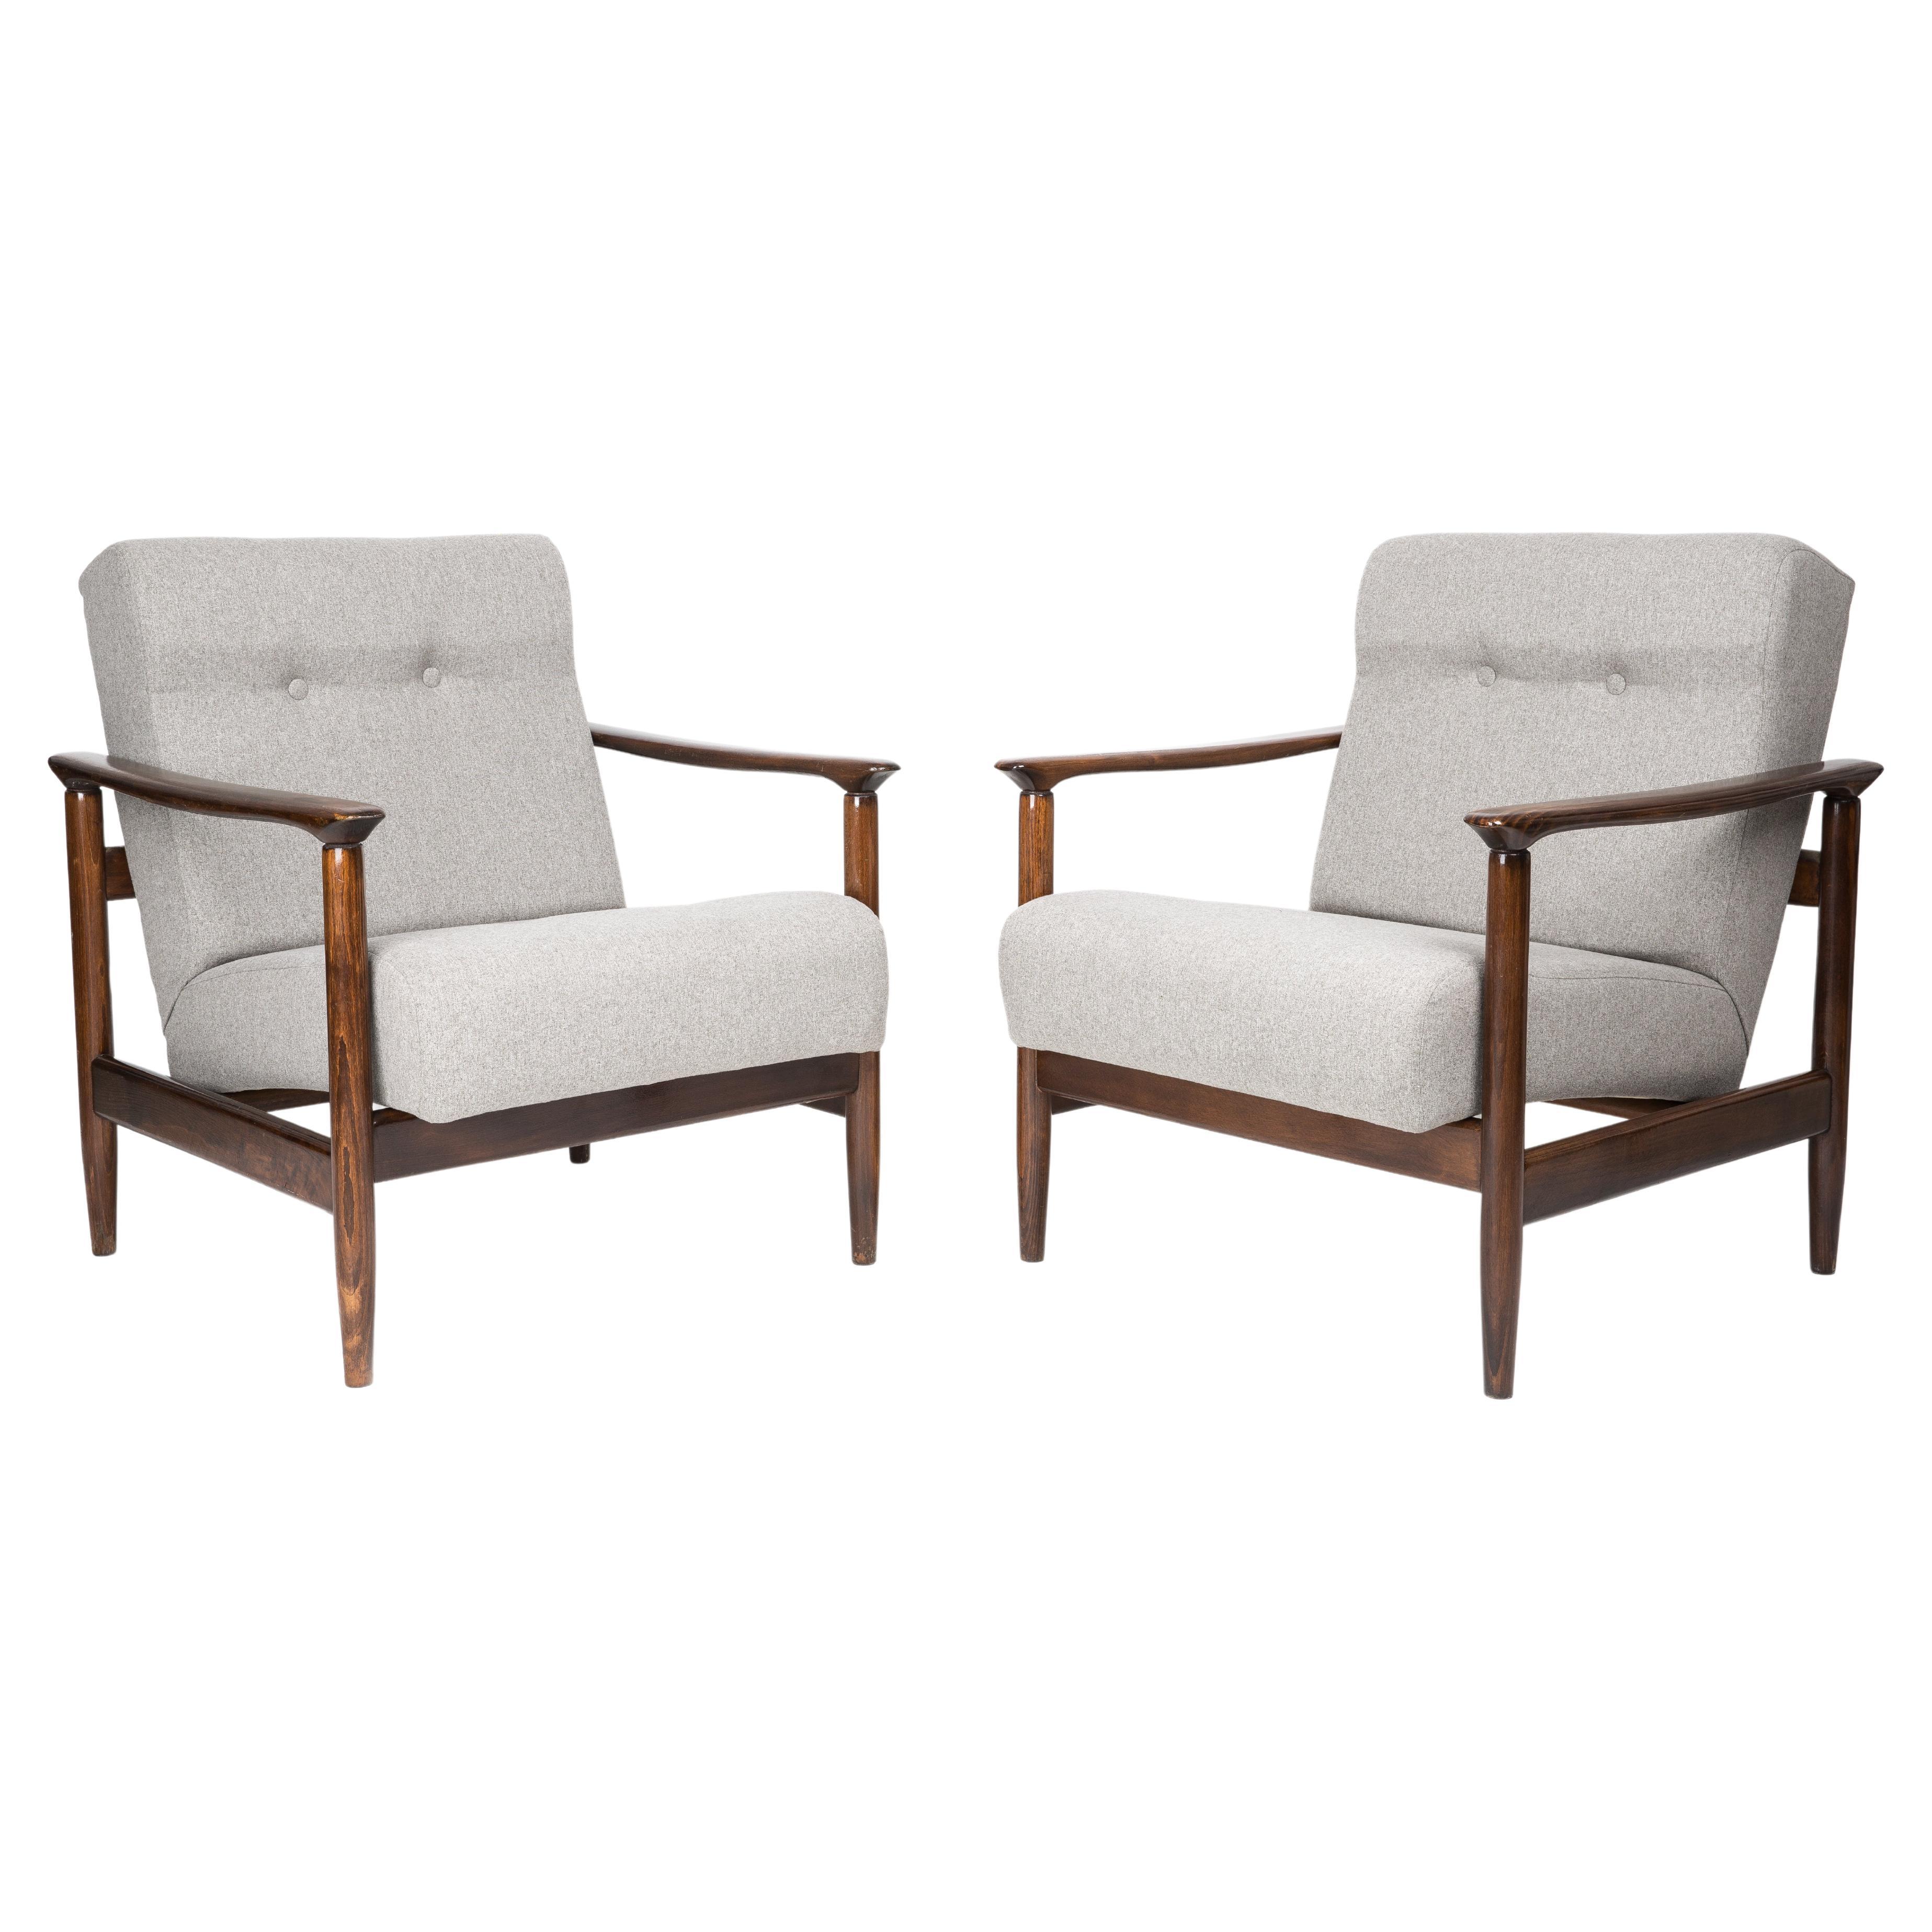 Set of Two Mid Century Beige Wool Armchairs, by Edmund Homa, Europe, 1960s For Sale